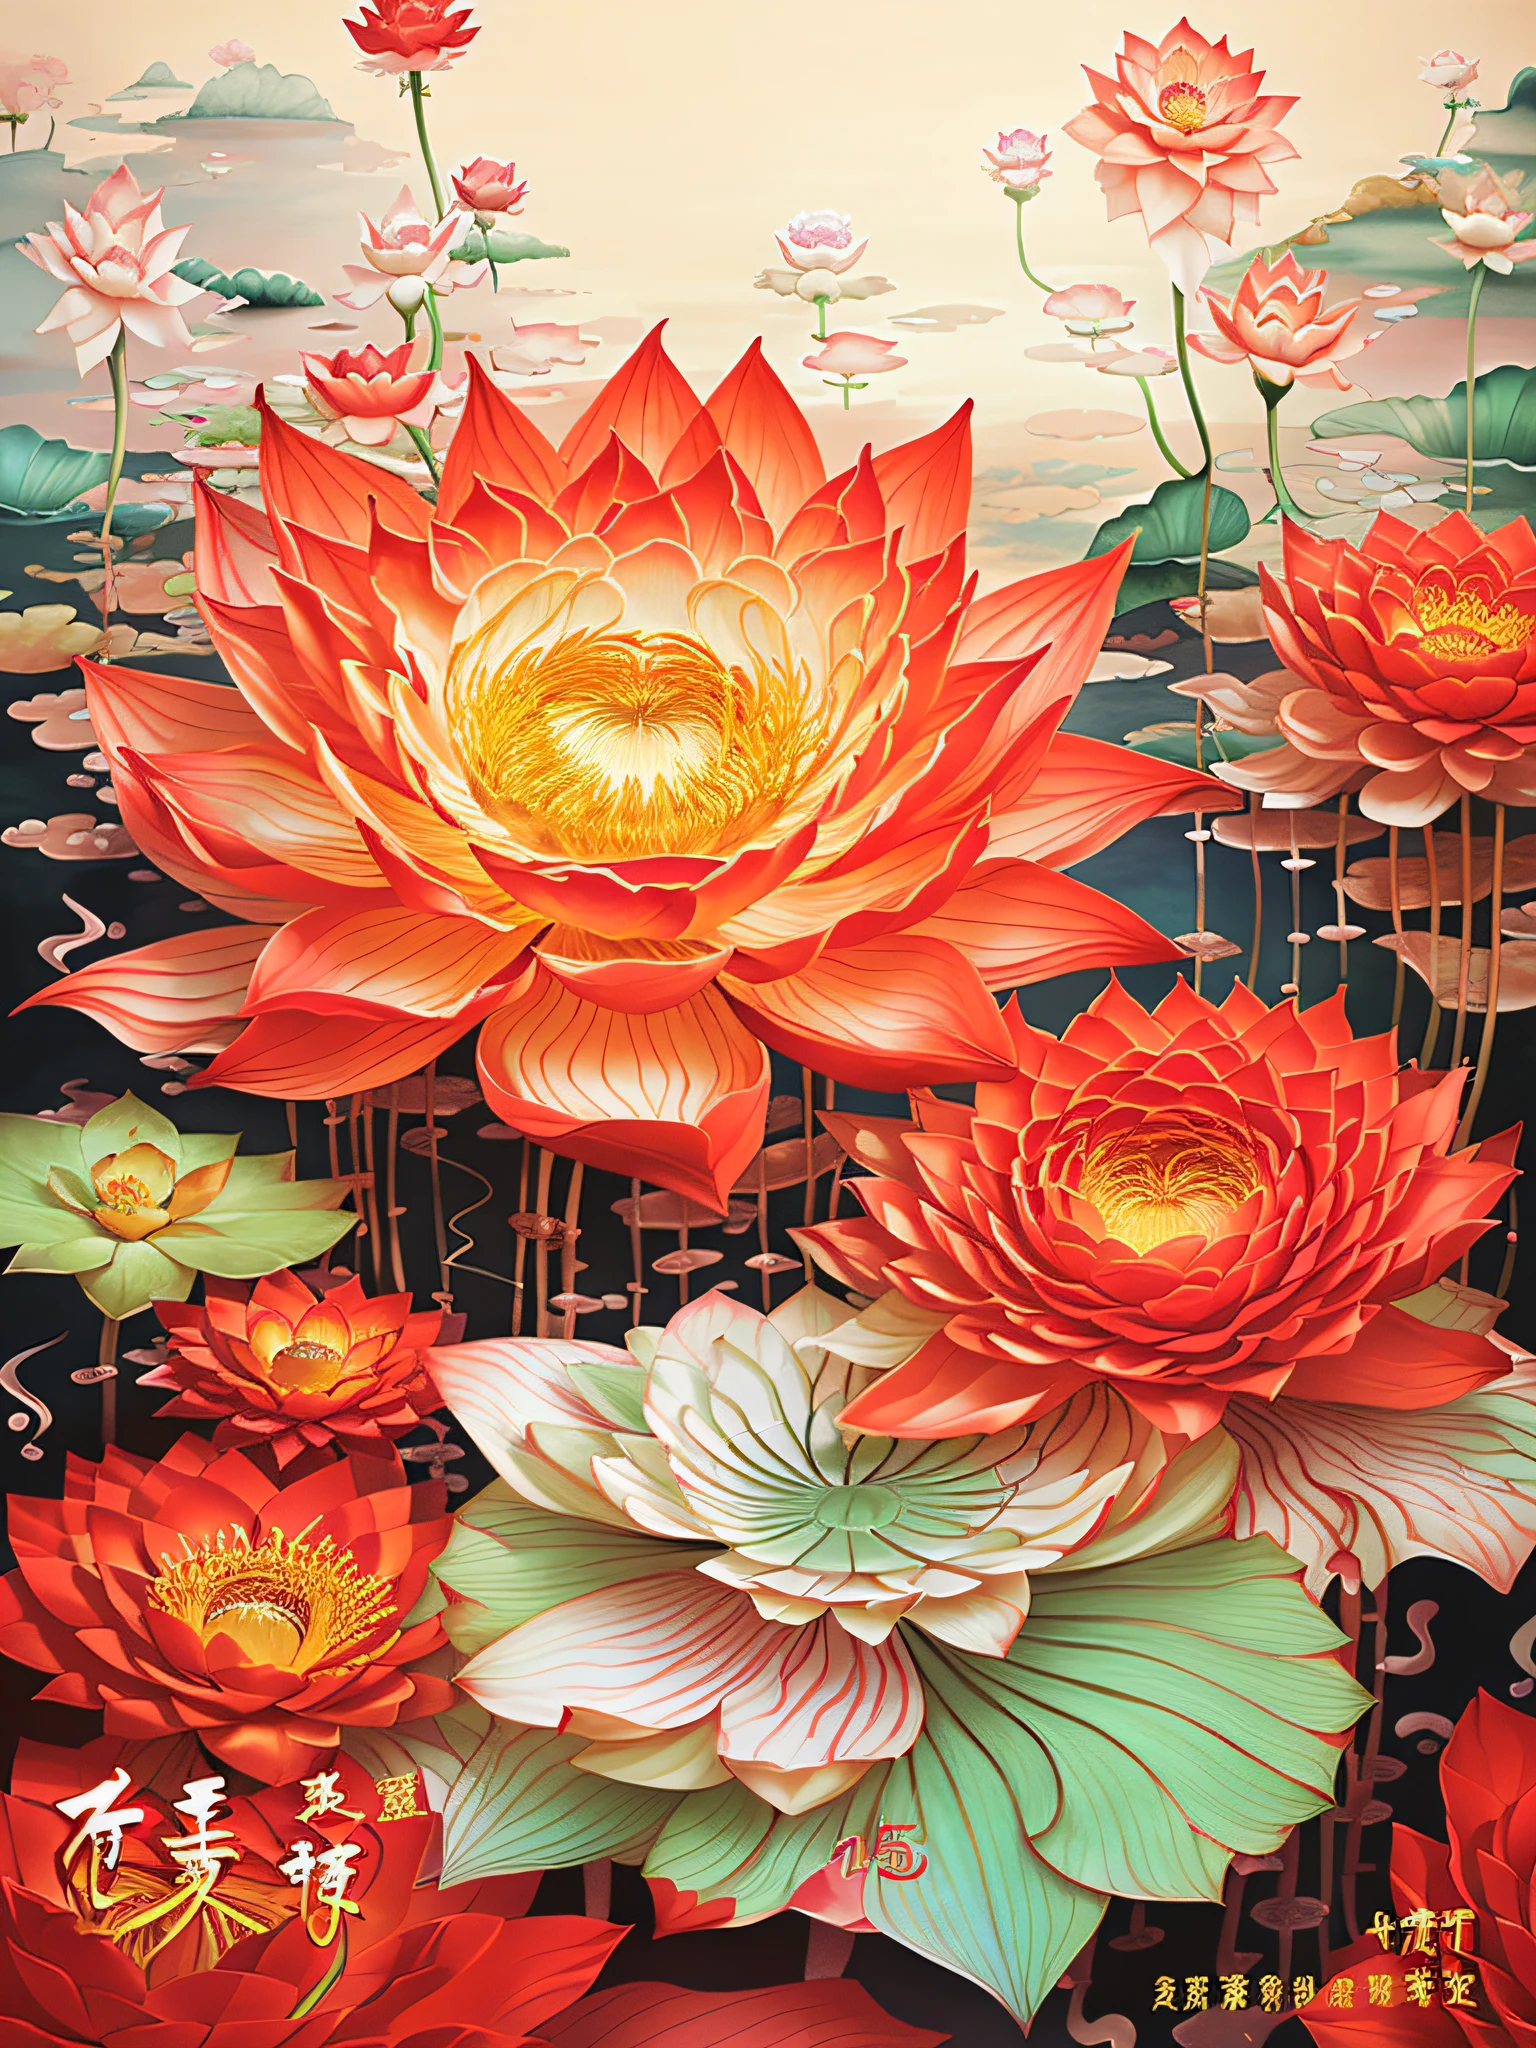 There is a painting，The painting is of a red flower，There are a lot of petals, celestial red flowers vibe, surreal waiizi flowers, james jean and wlop, lotuses, james jean soft light 4 k, james jean soft light 4k, author：Park Hua, Lotus, author：Lu Guang, author：Chen Lin, Digital painting | Intricate, with lotus flowers, author：Gao Fenghan